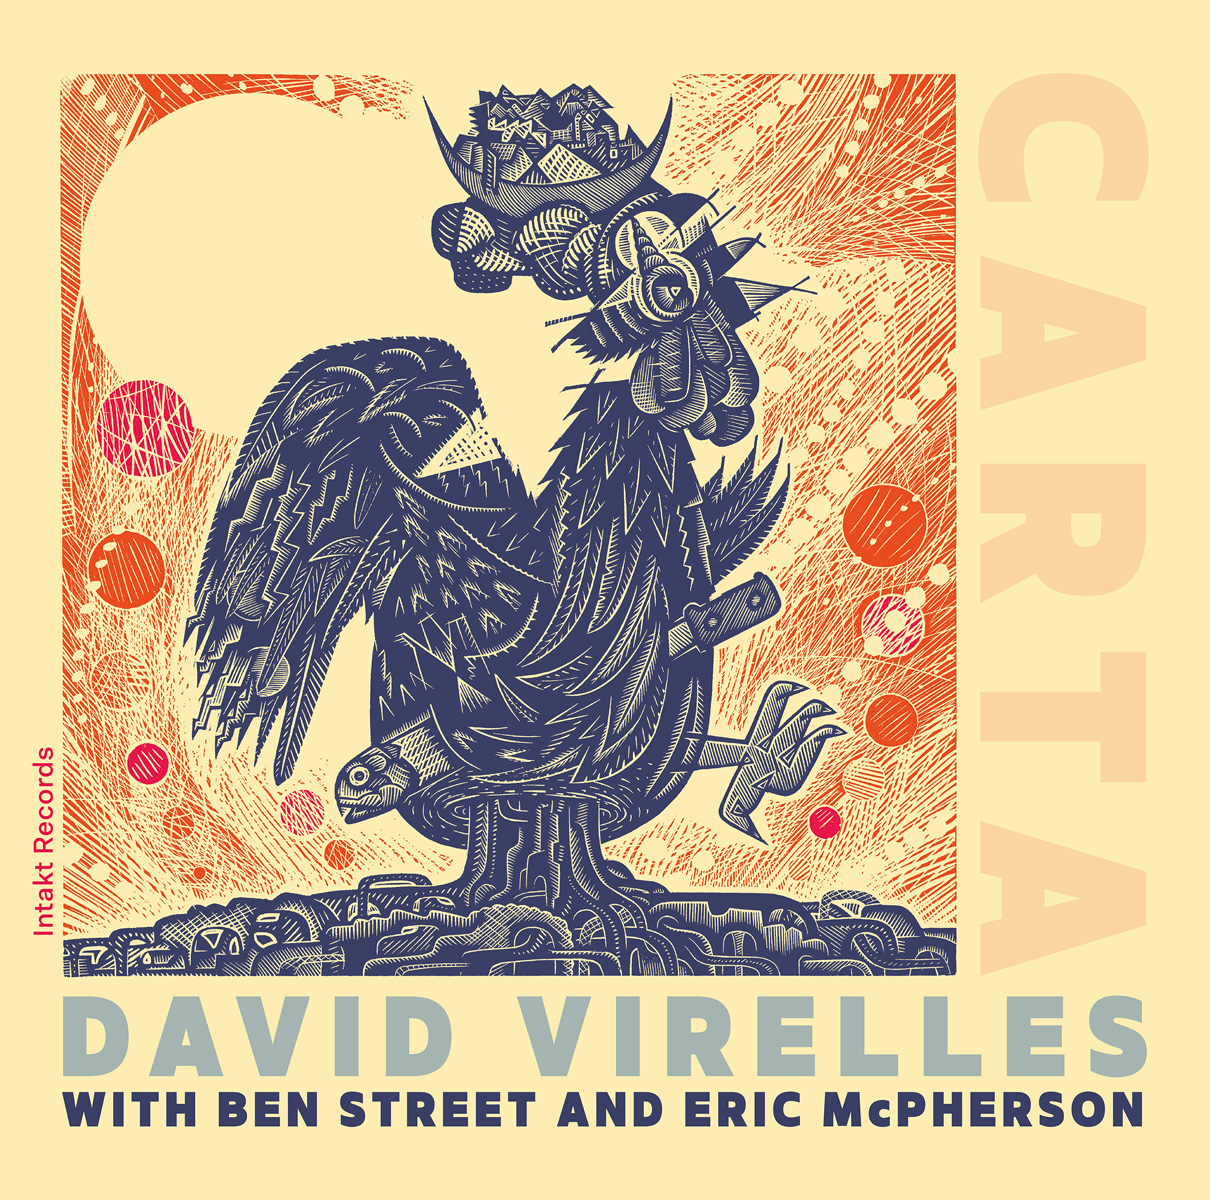 DAVID VIRELLES
WITH BEN STREET AND ERIC McPHERSON
CARTA cover front intakt records